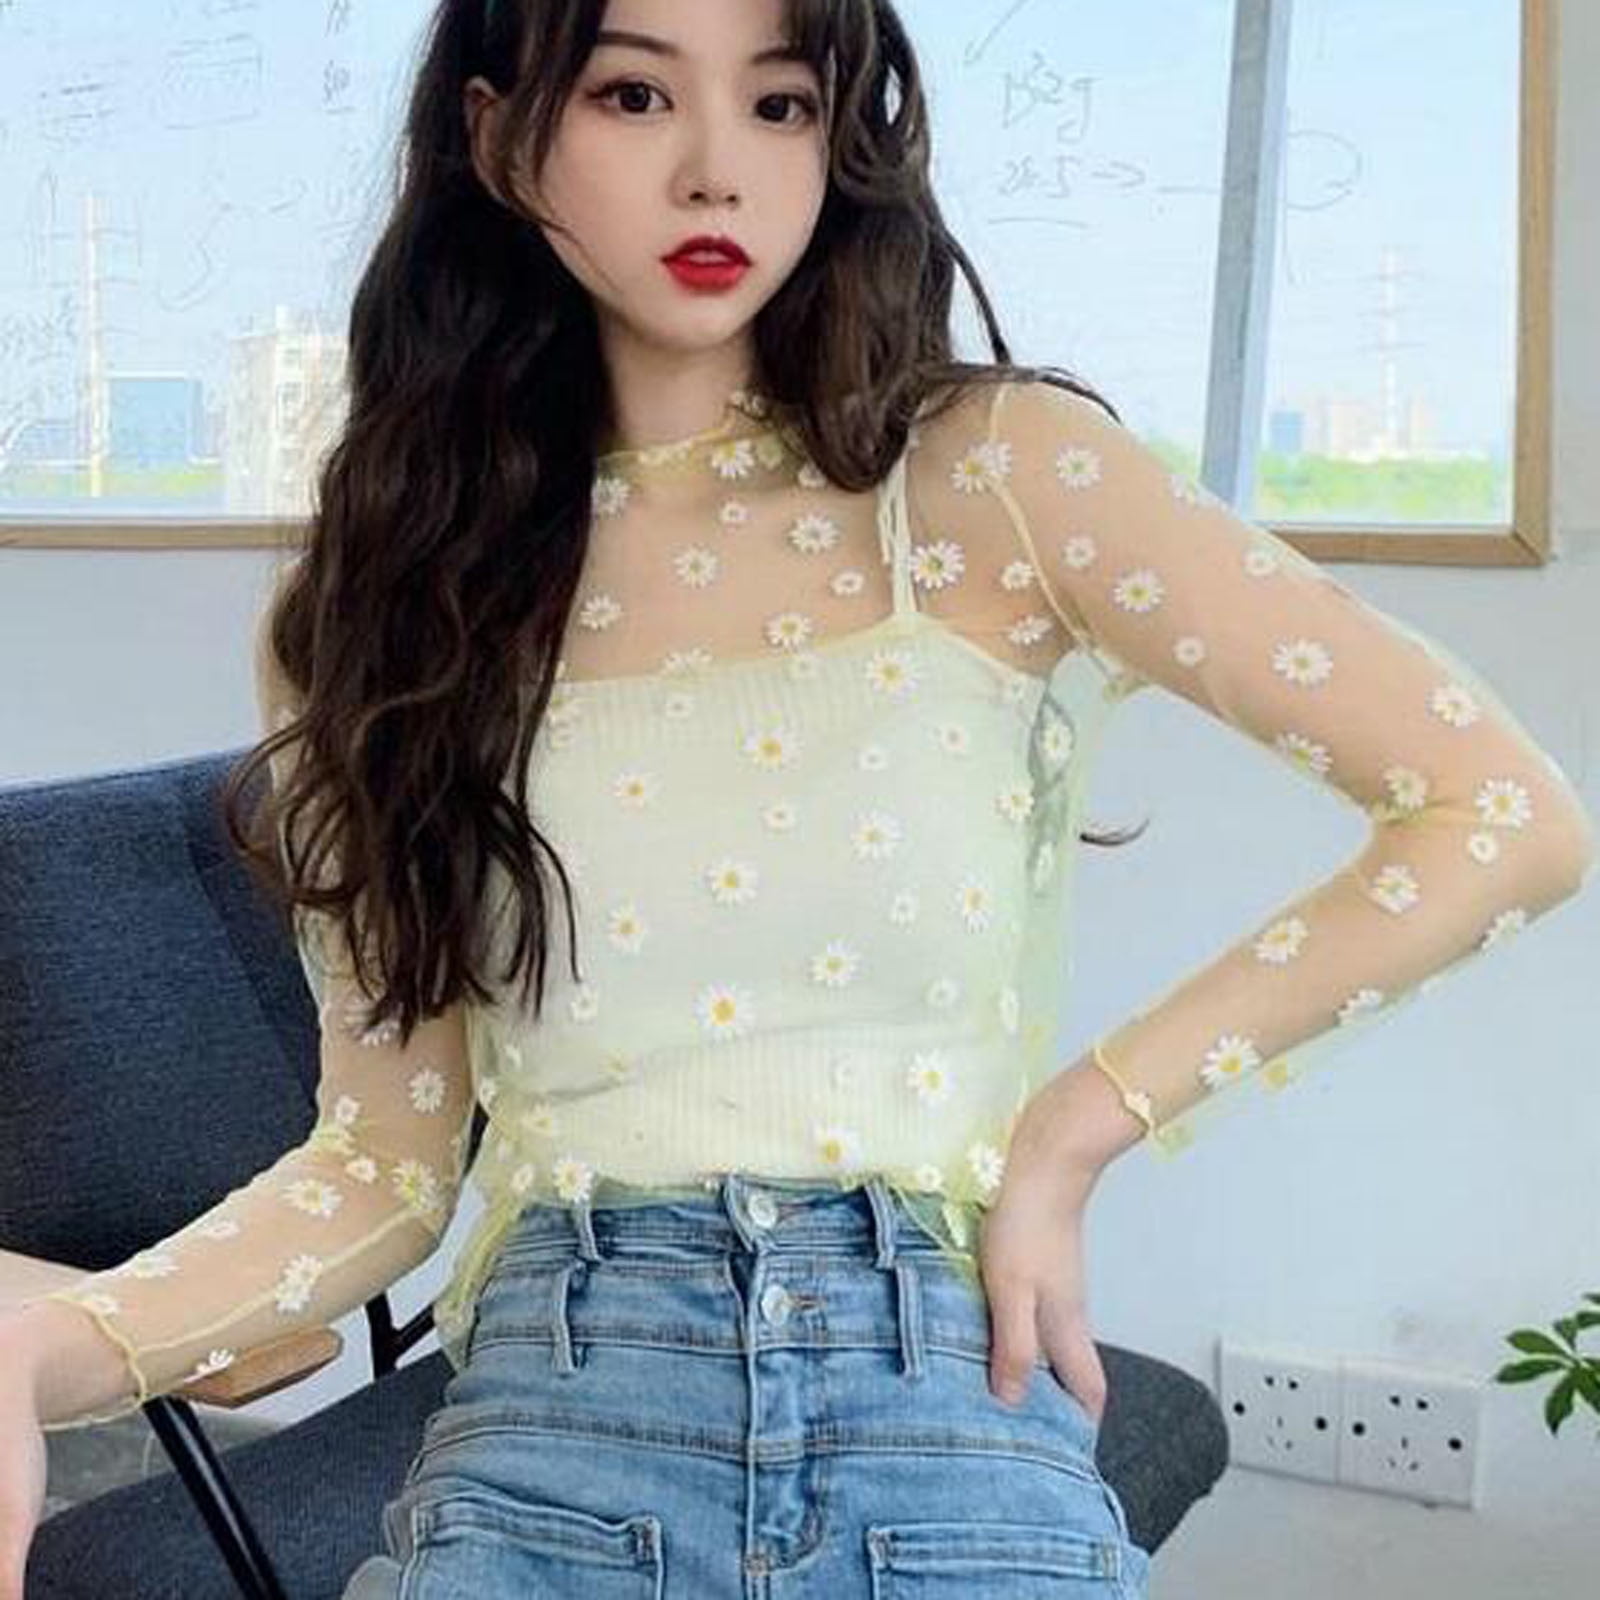 Lmtime Women Fashion Pullover Ladies O-Neck Full Sleeve Candy Color Blouse Casual Lace Patchwork Tops 